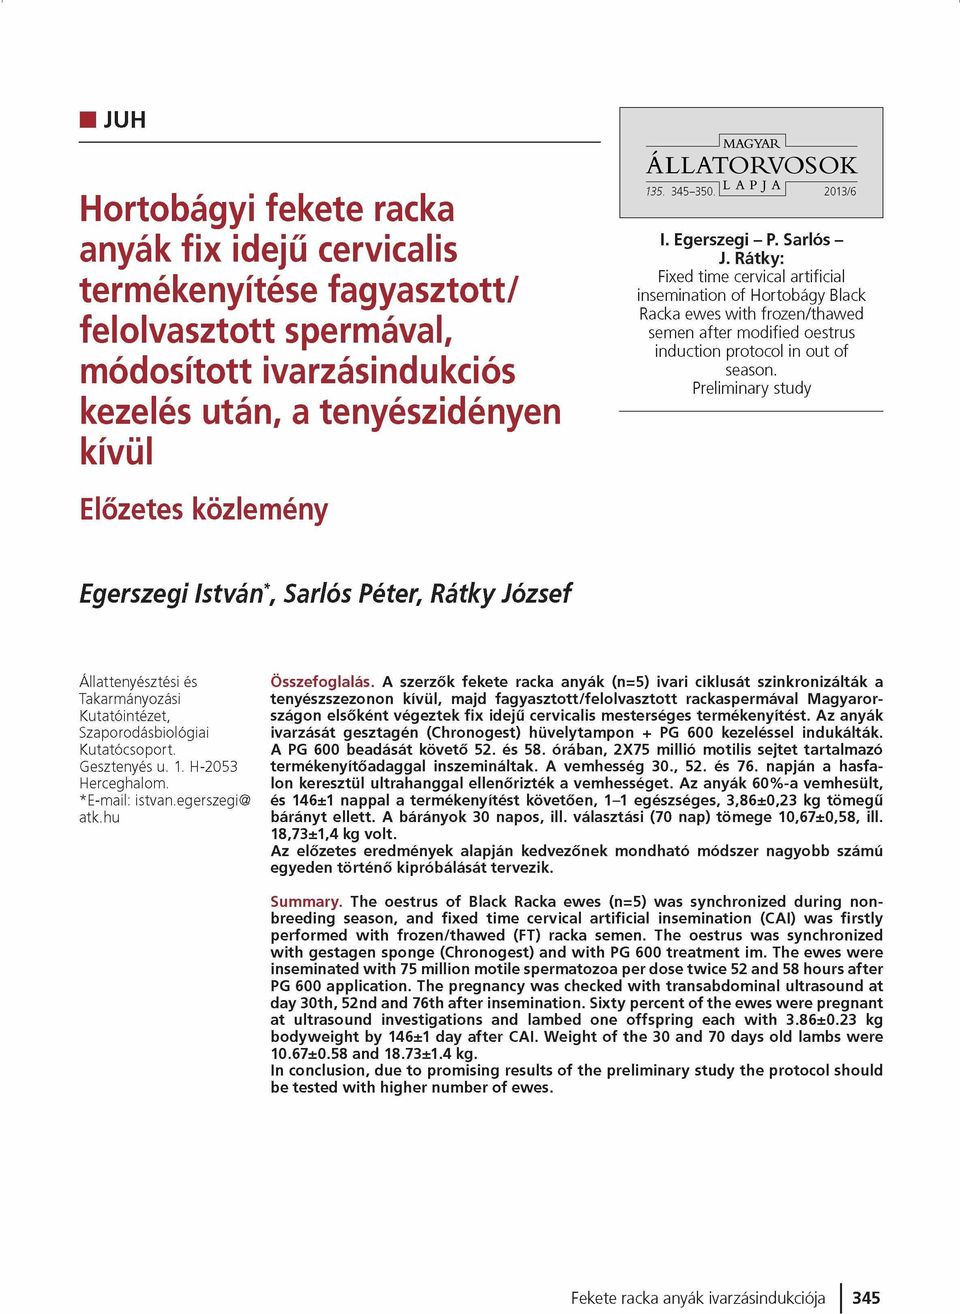 Rátky: Fixed time cervical artificial insemination of Hortobágy Black Racka ewes w ith frozen/thawed semen after modified oestrus induction protocol in out of season.